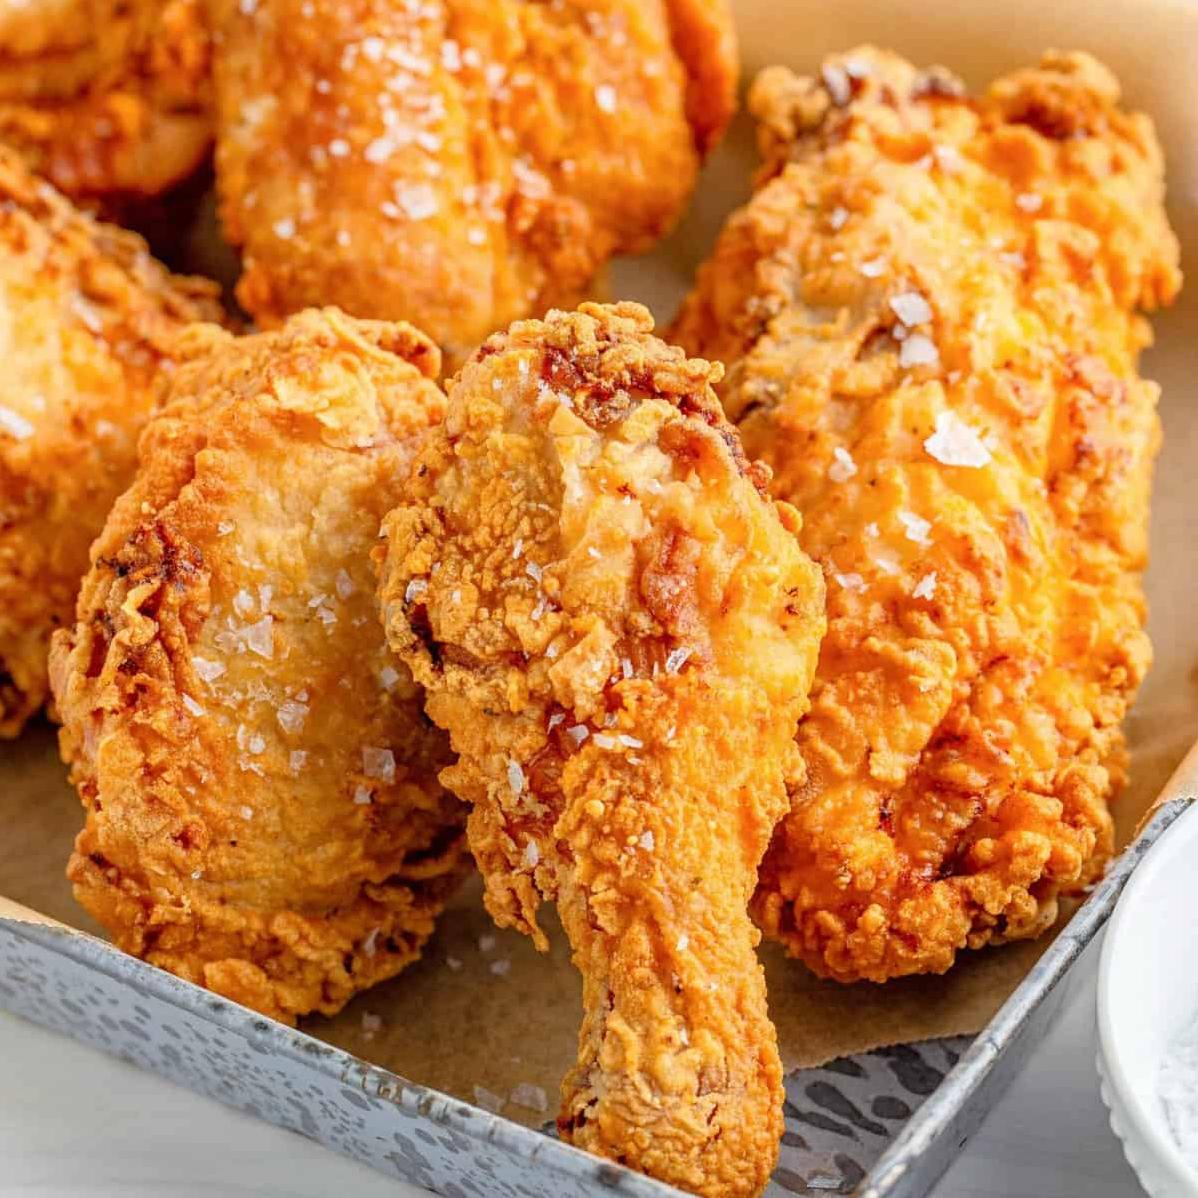  Southern-fried to crispy perfection!